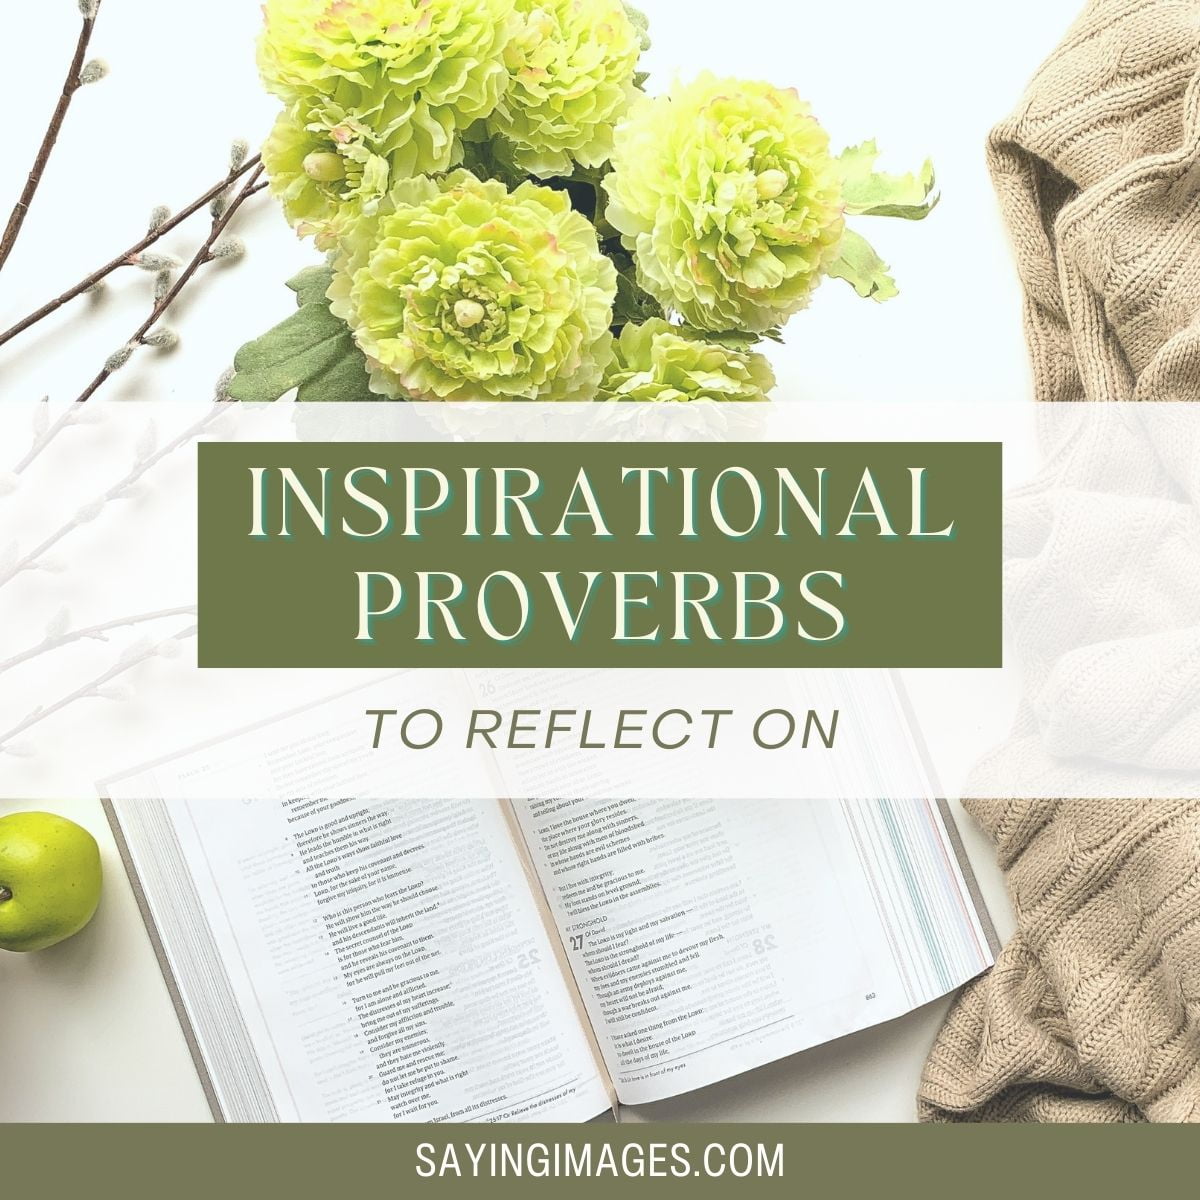 Inspirational and Enlightening Proverbs to Reflect On